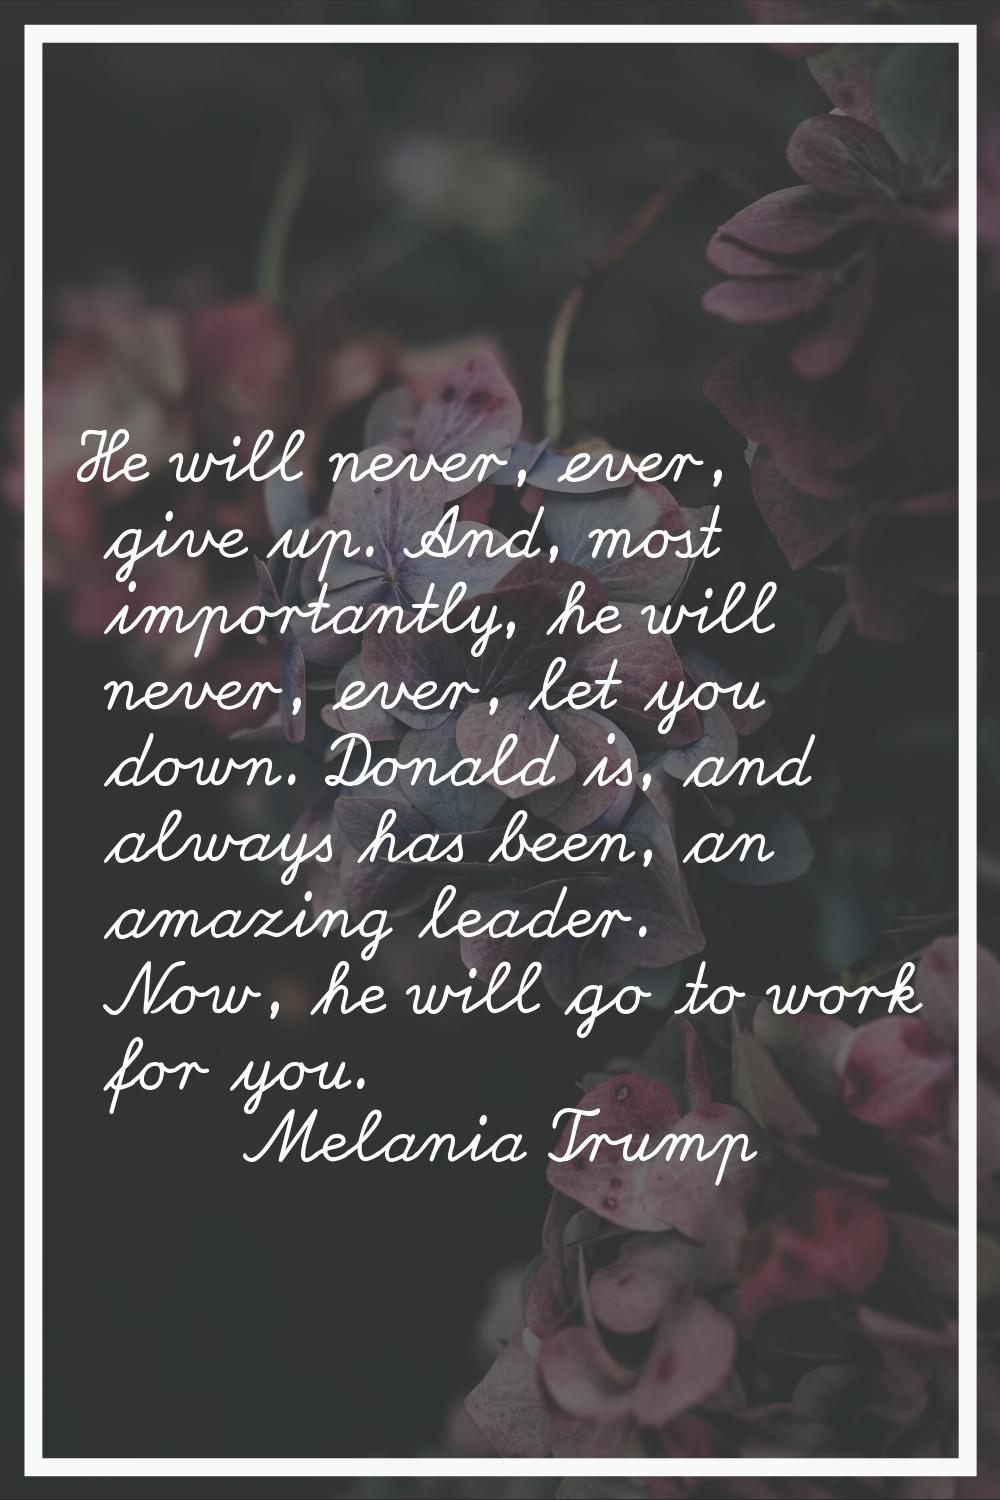 He will never, ever, give up. And, most importantly, he will never, ever, let you down. Donald is, 